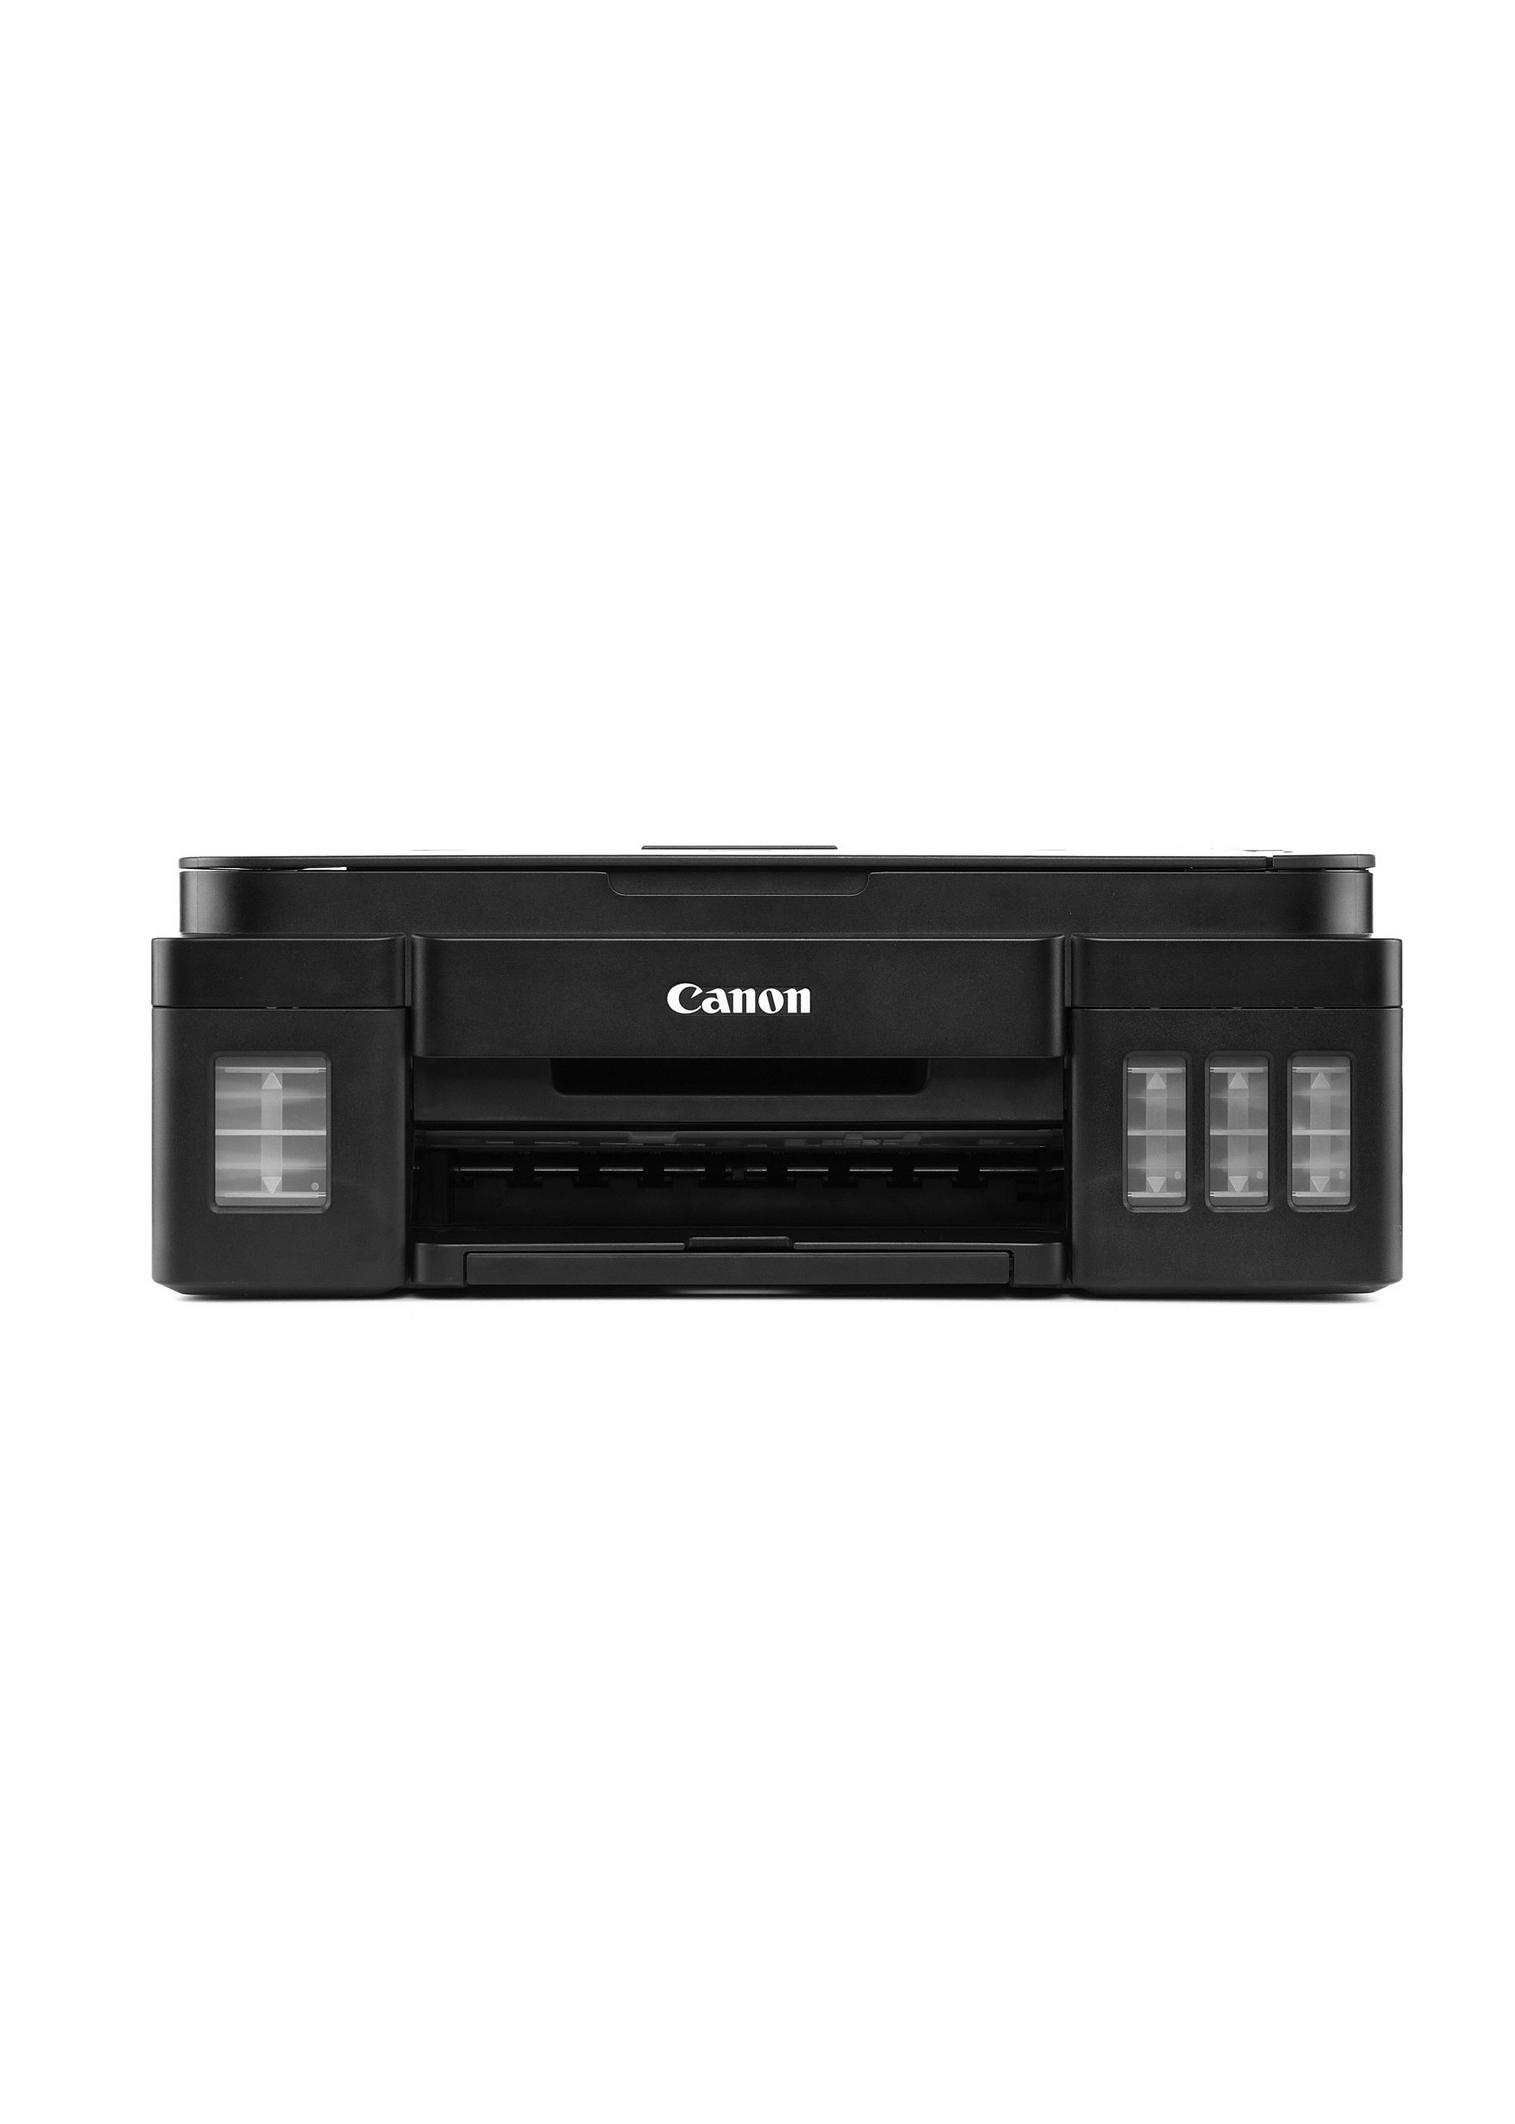 Canon Paper Printer - Solid Ink | 3D model